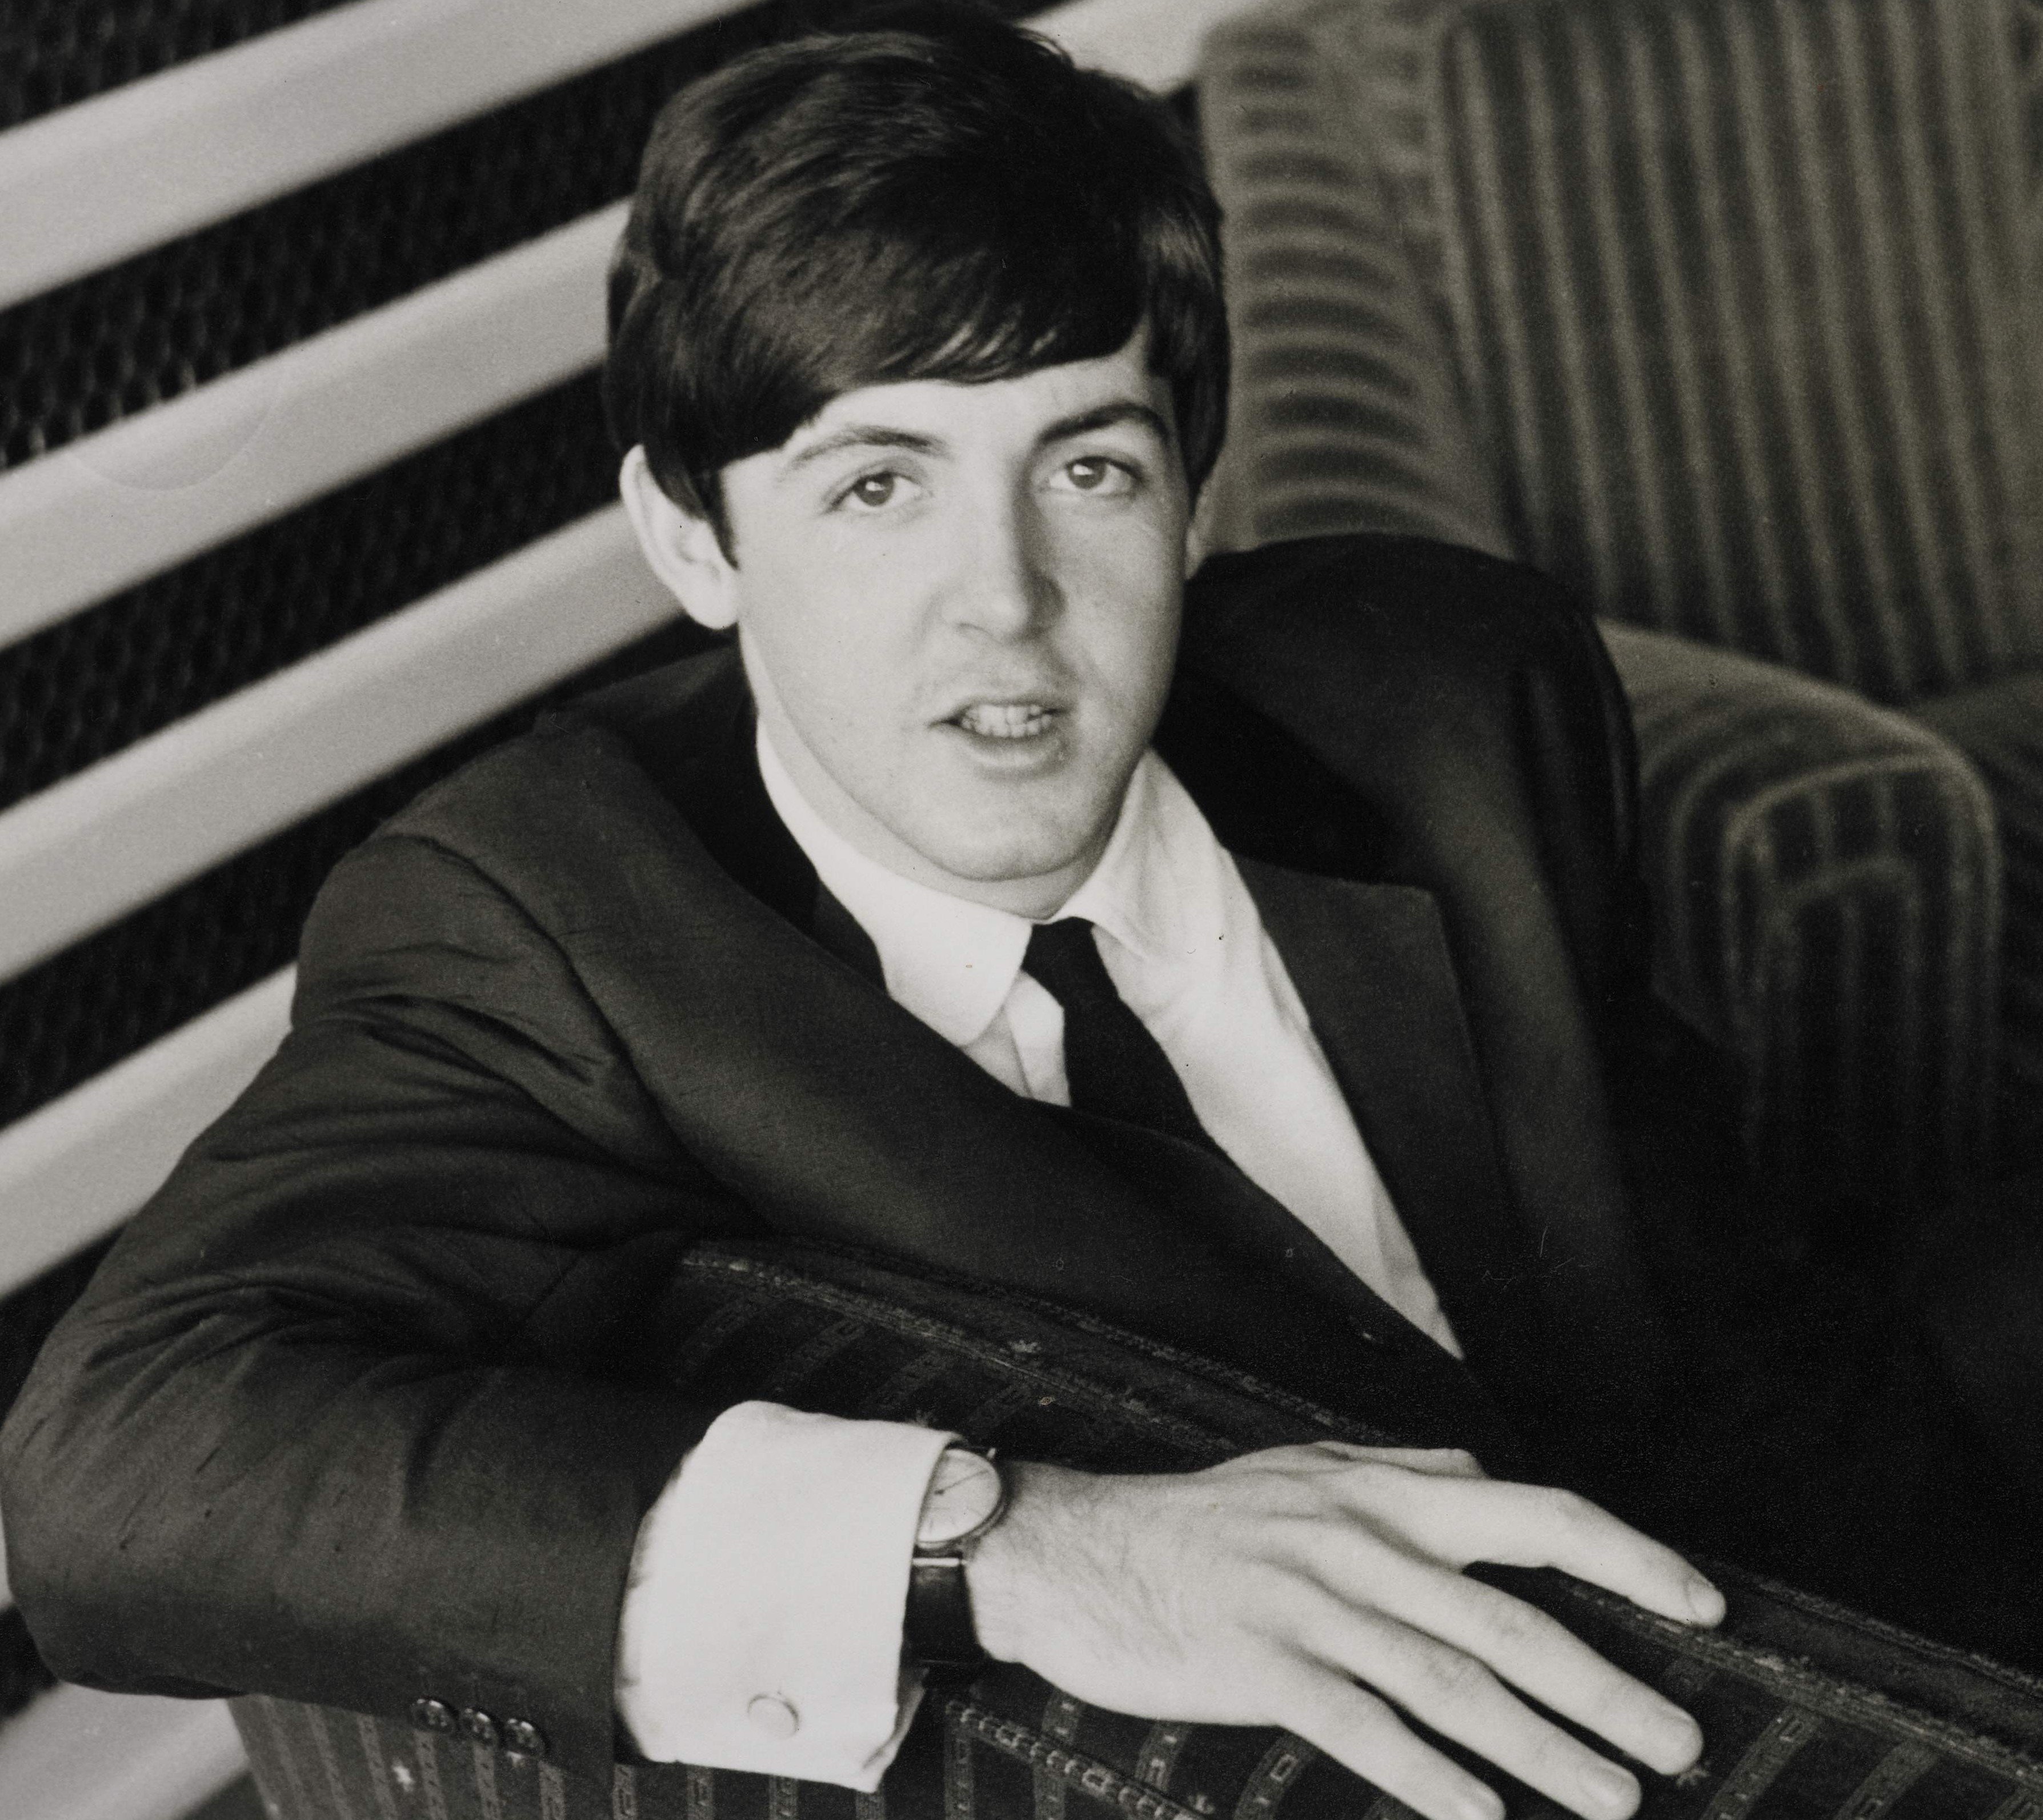 Paul McCartney in a suit during The Beatles' "Eleanor Rigby" era